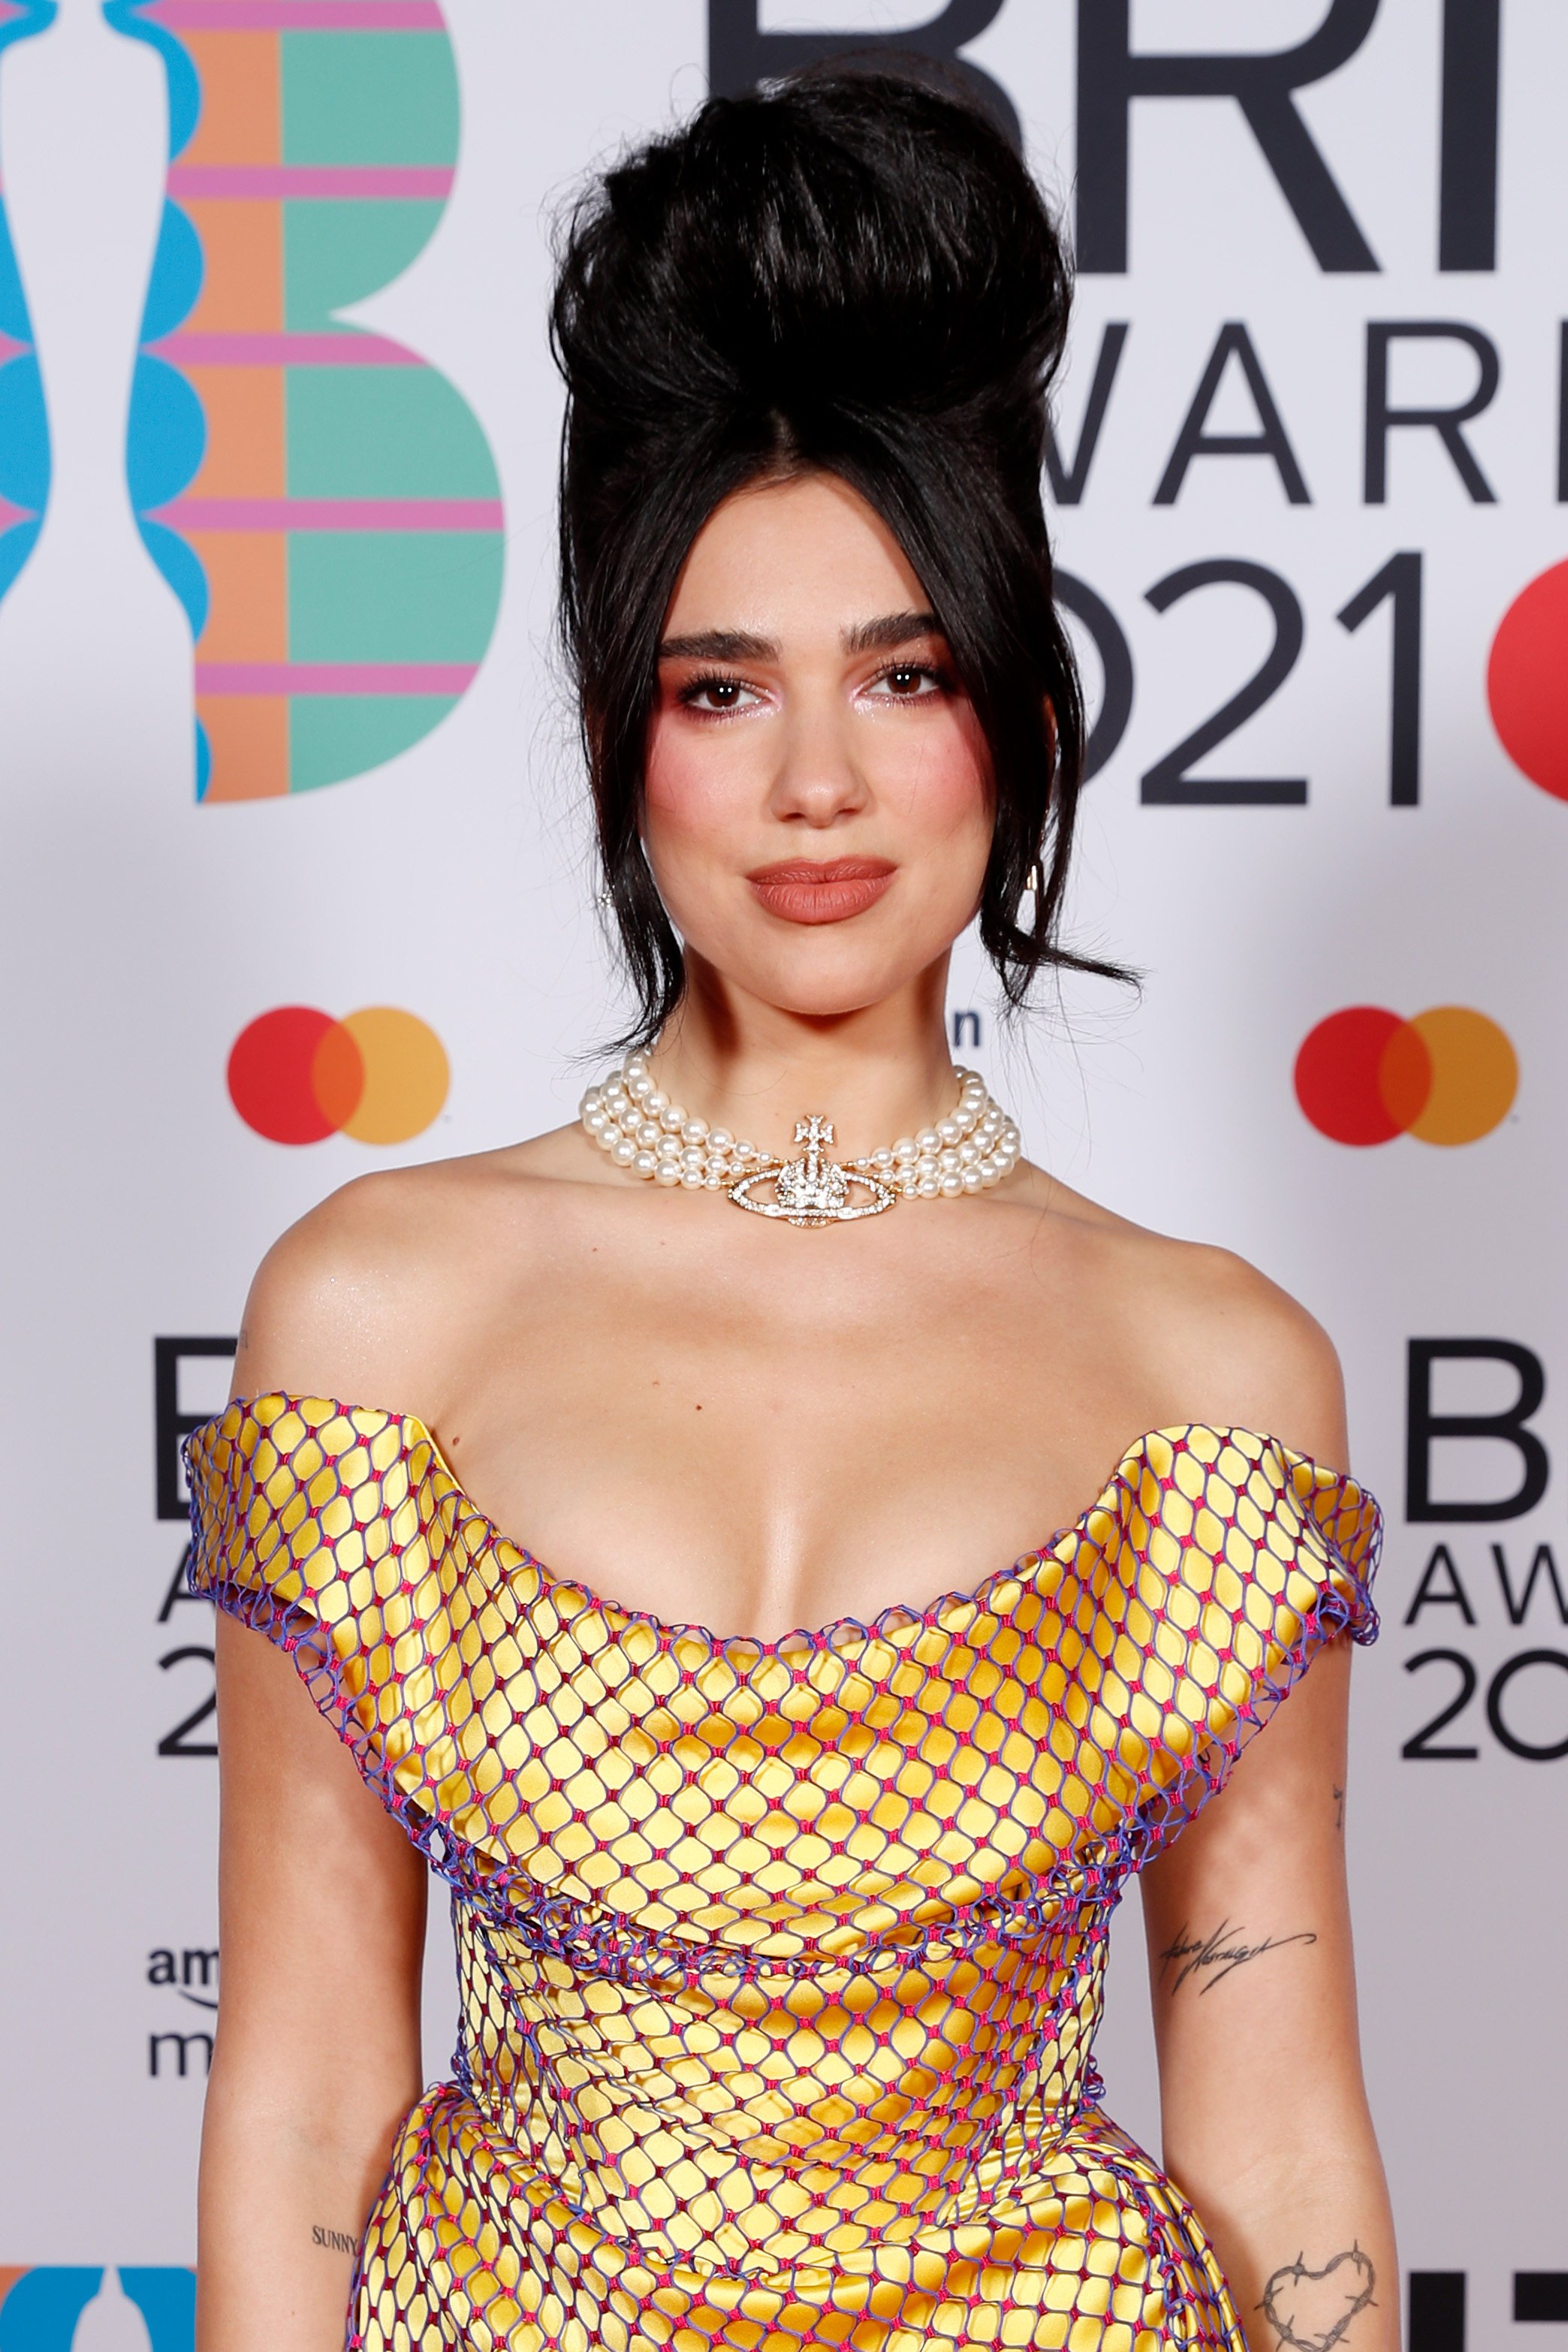 Dua Lipa wears a pearl necklace by Vivienne Westwood at the Brit Awards 2021 in London, England. Photo: JMEnternational for Brit Awards / Getty Images